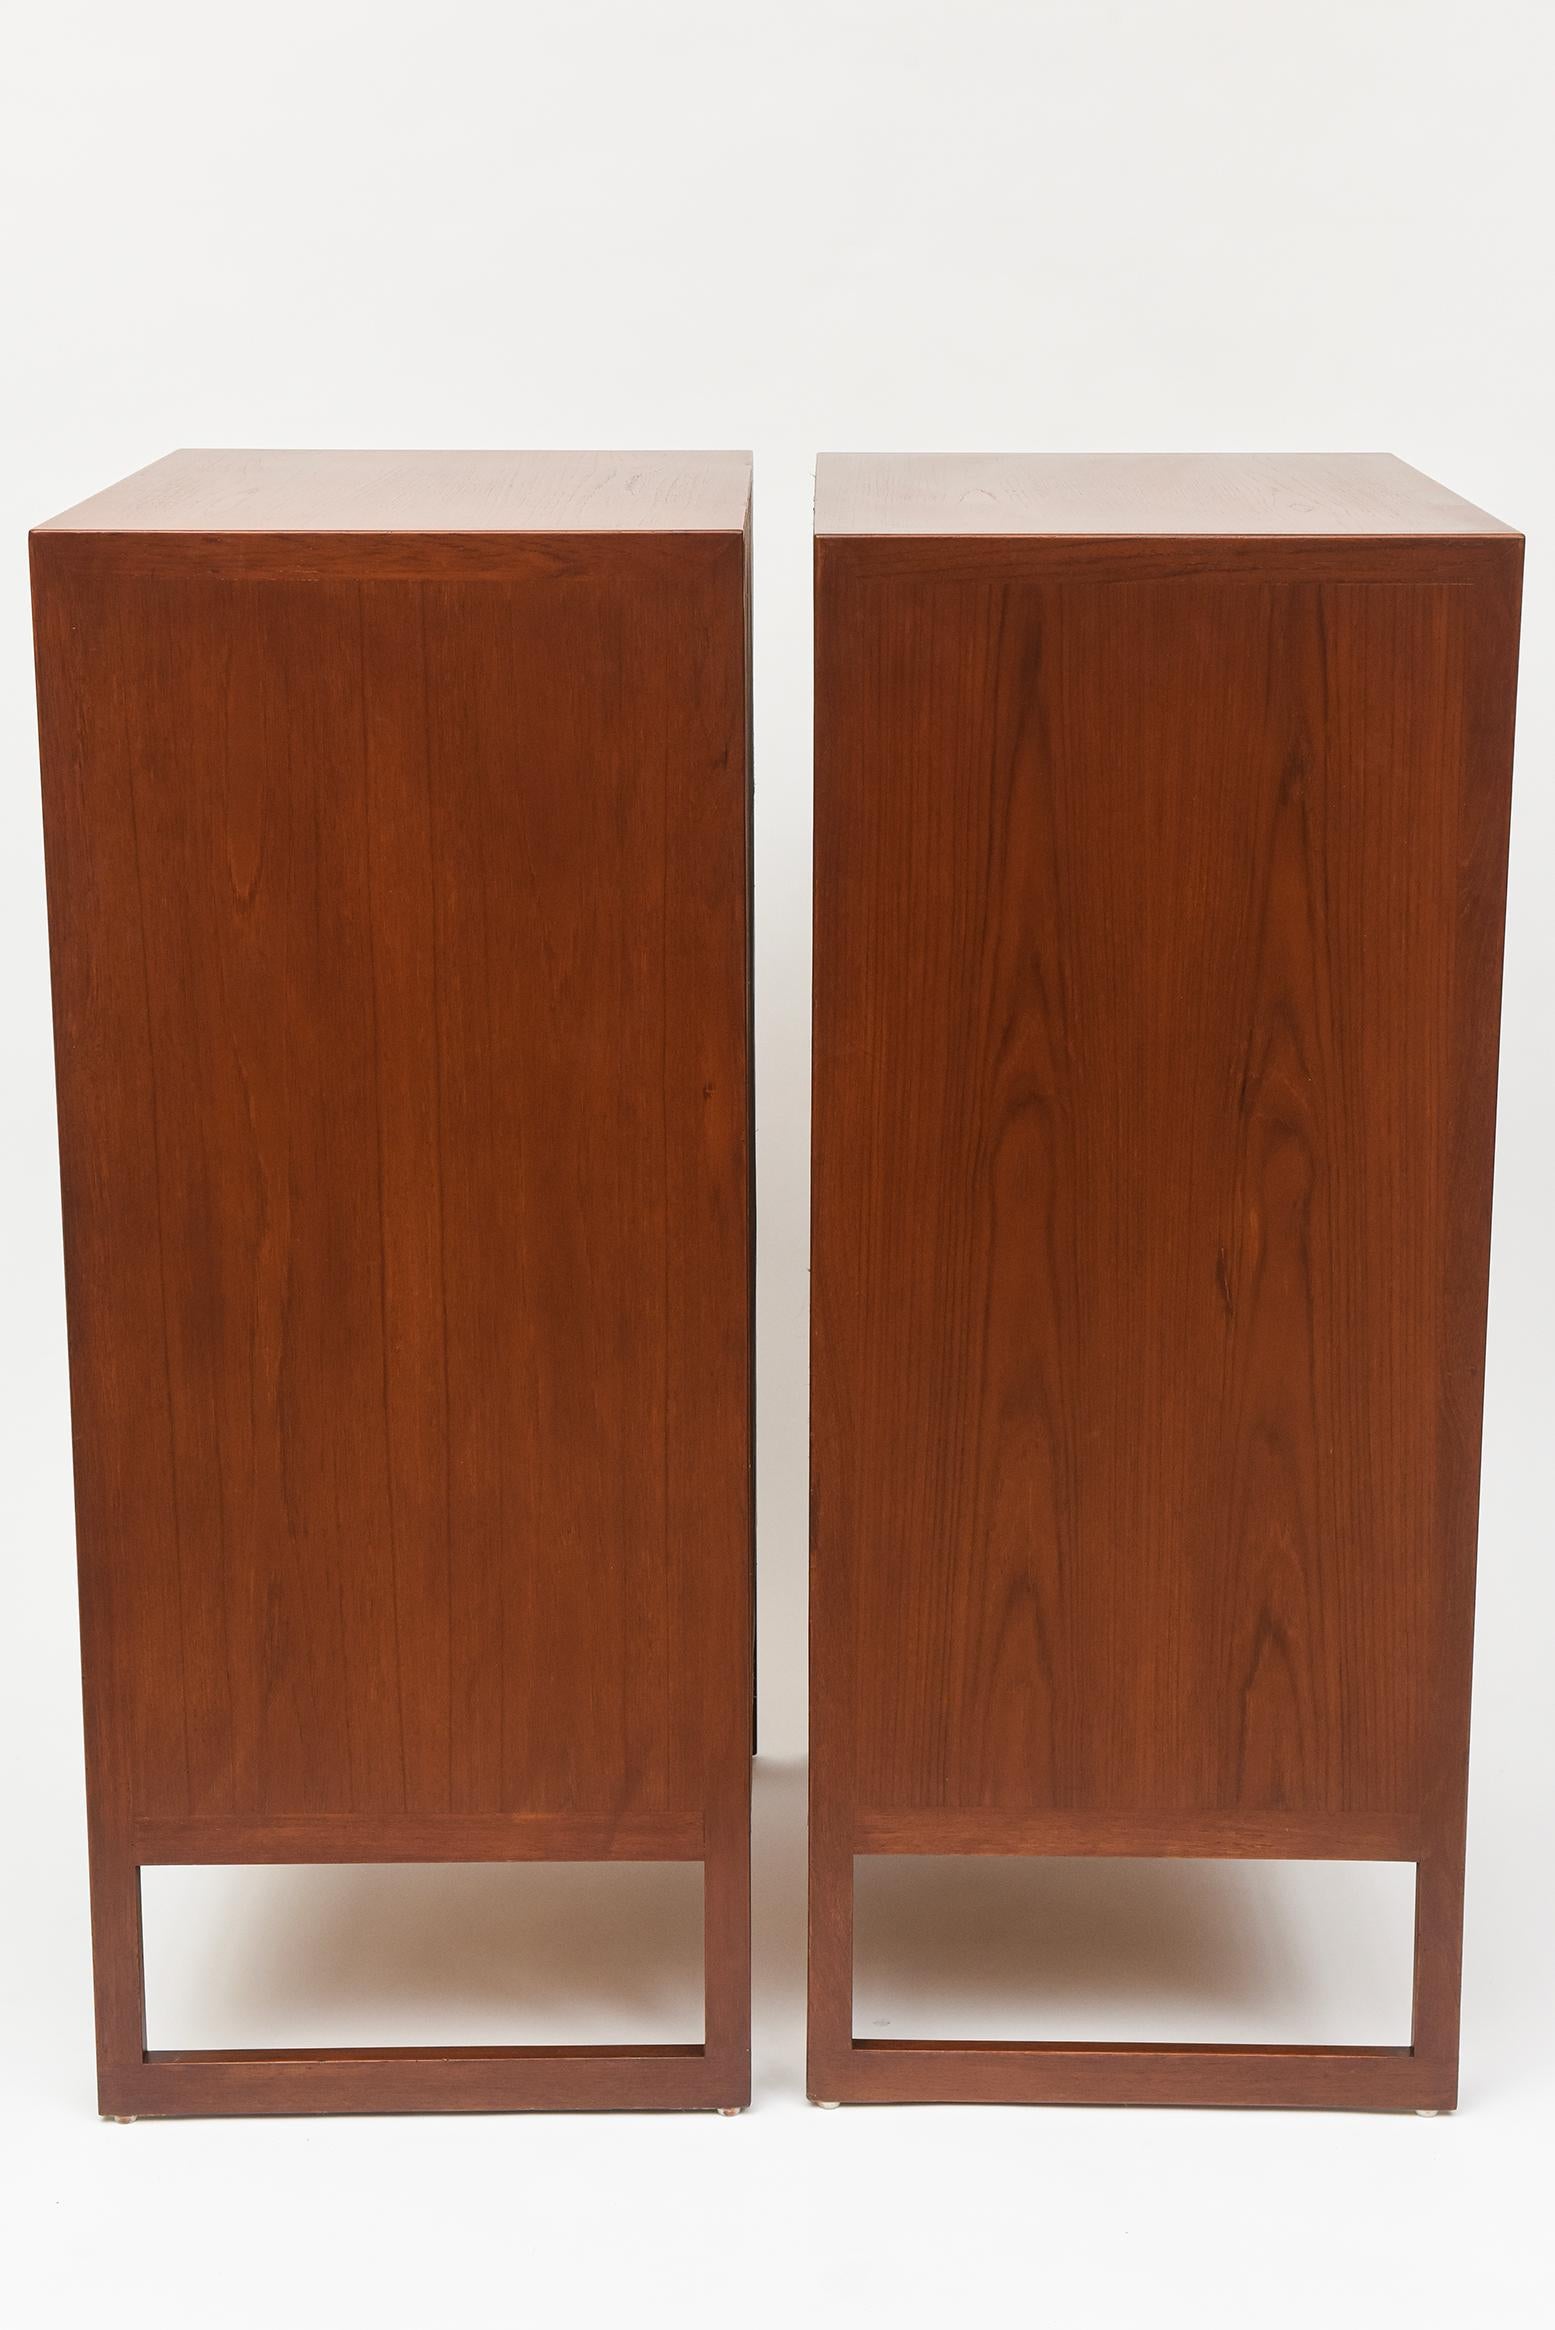 Teak Tall Chest of Drawers, Model BM64 by Børge Mogensen, C. 1960- Two Available In Good Condition For Sale In North Miami, FL